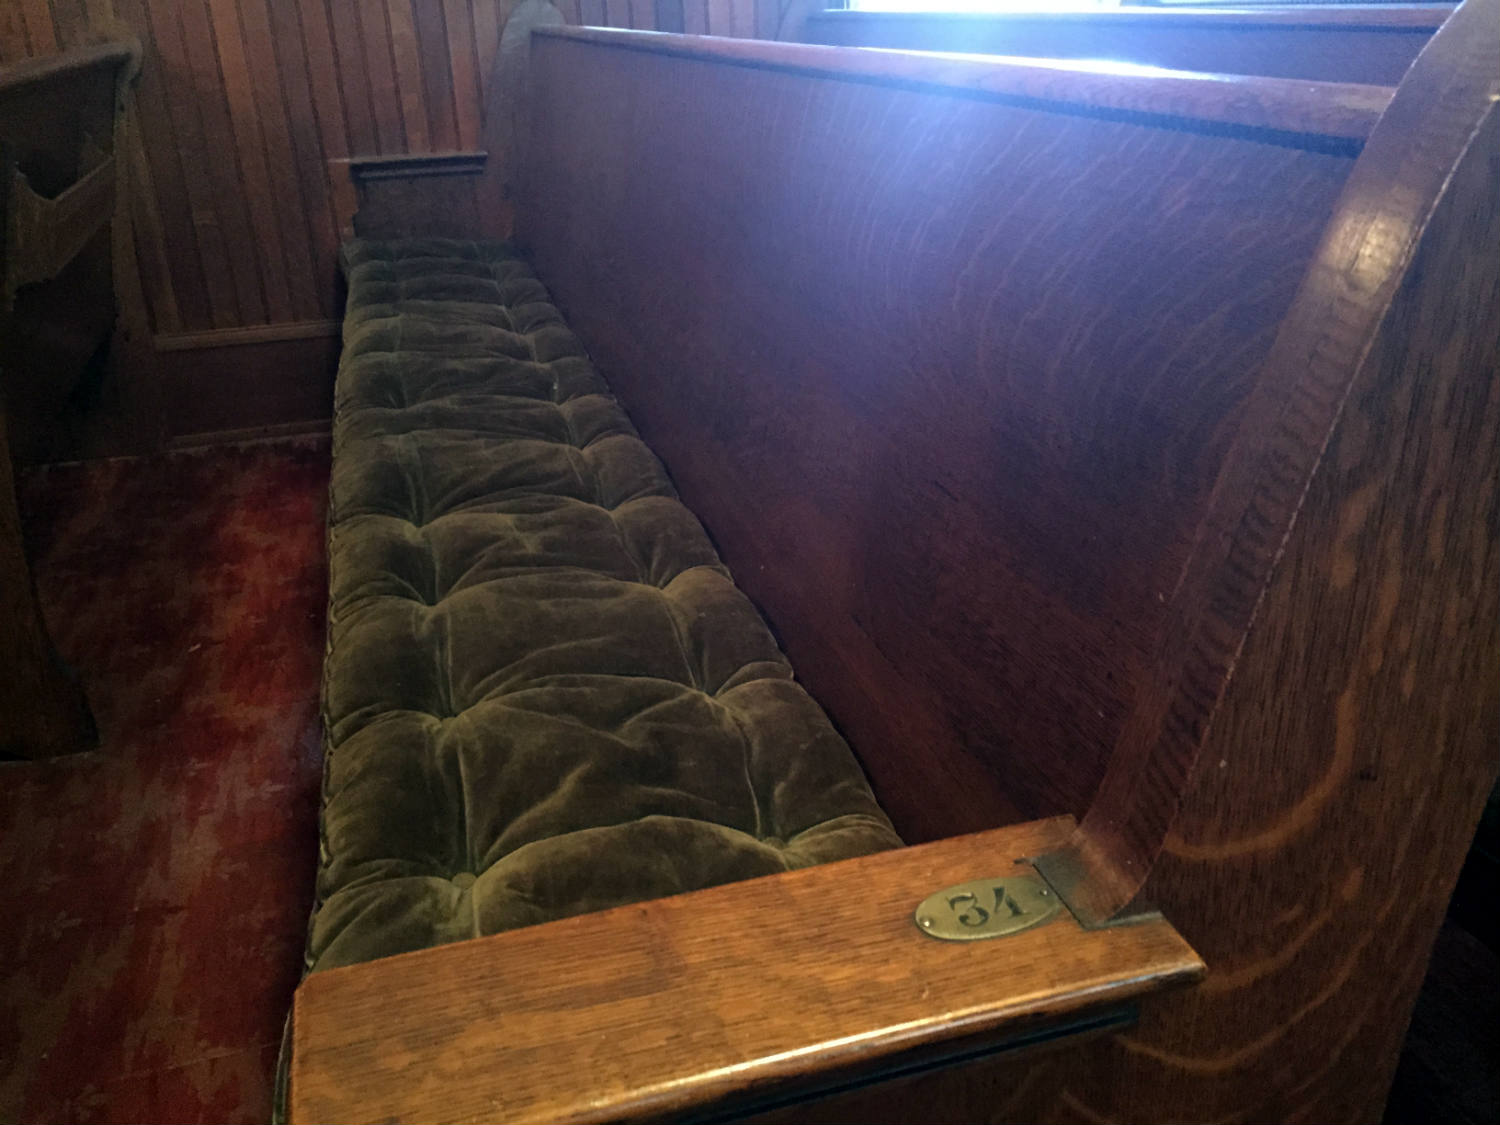 Numbered Pew in the Pullman Memorial Universalist Church in Albion